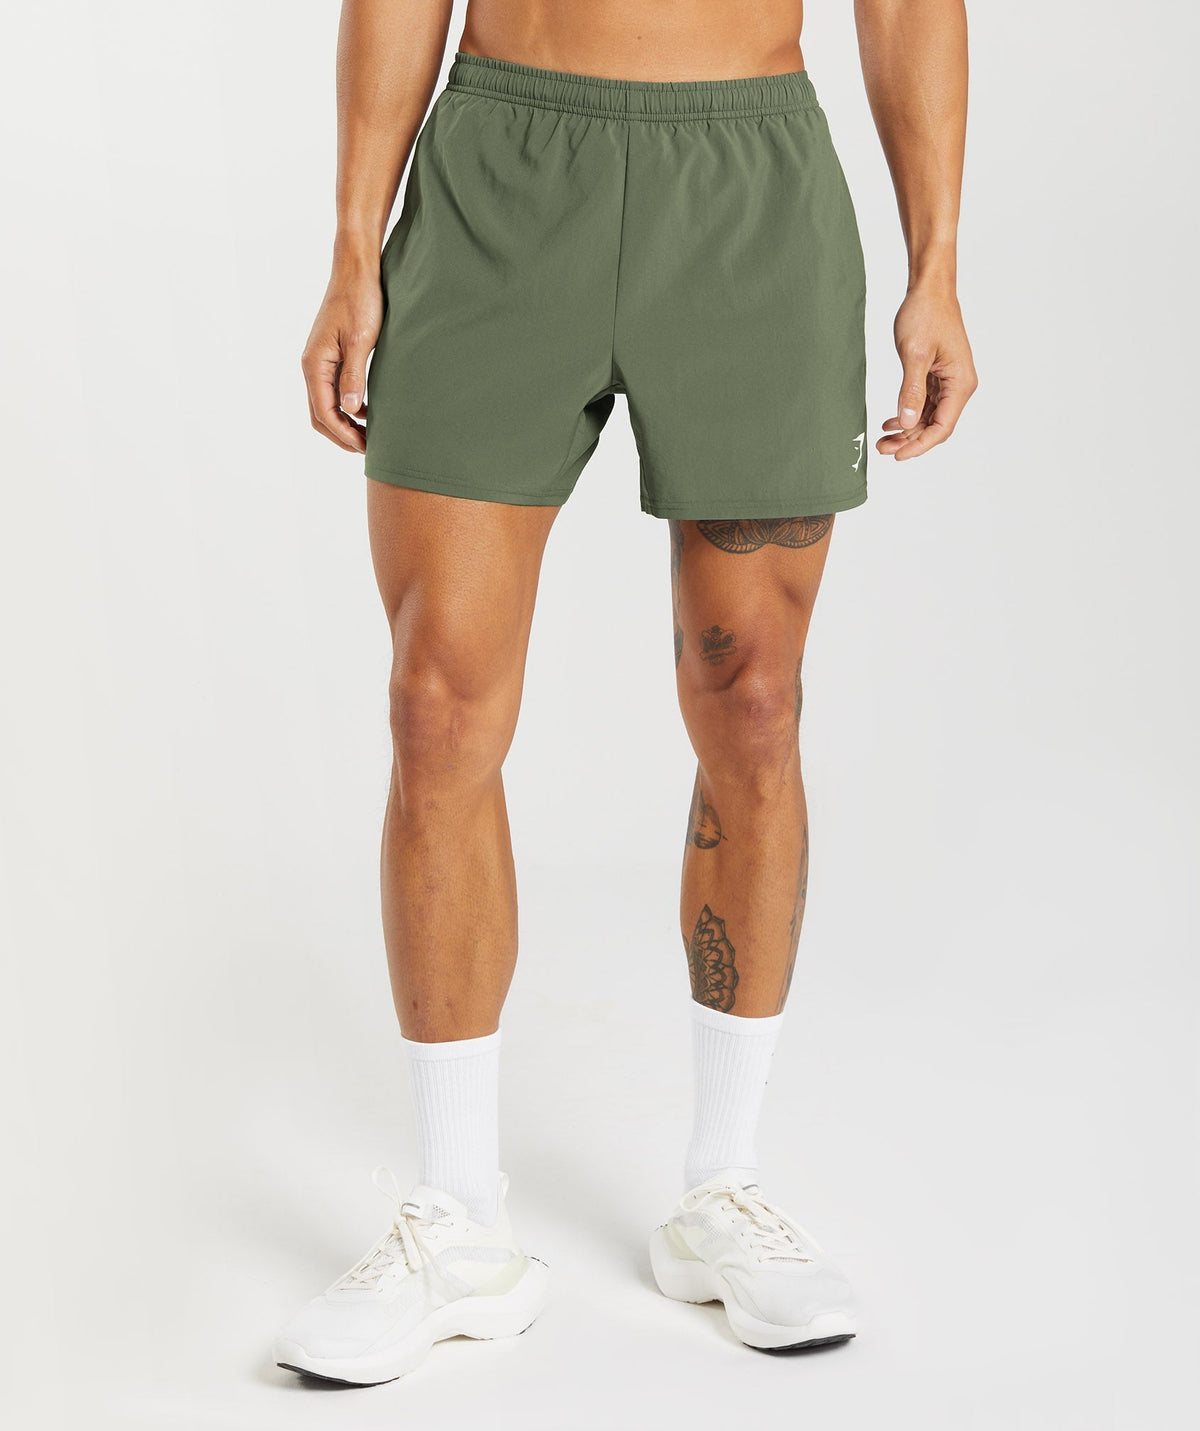 Arrival 5'' Shorts - core olive.